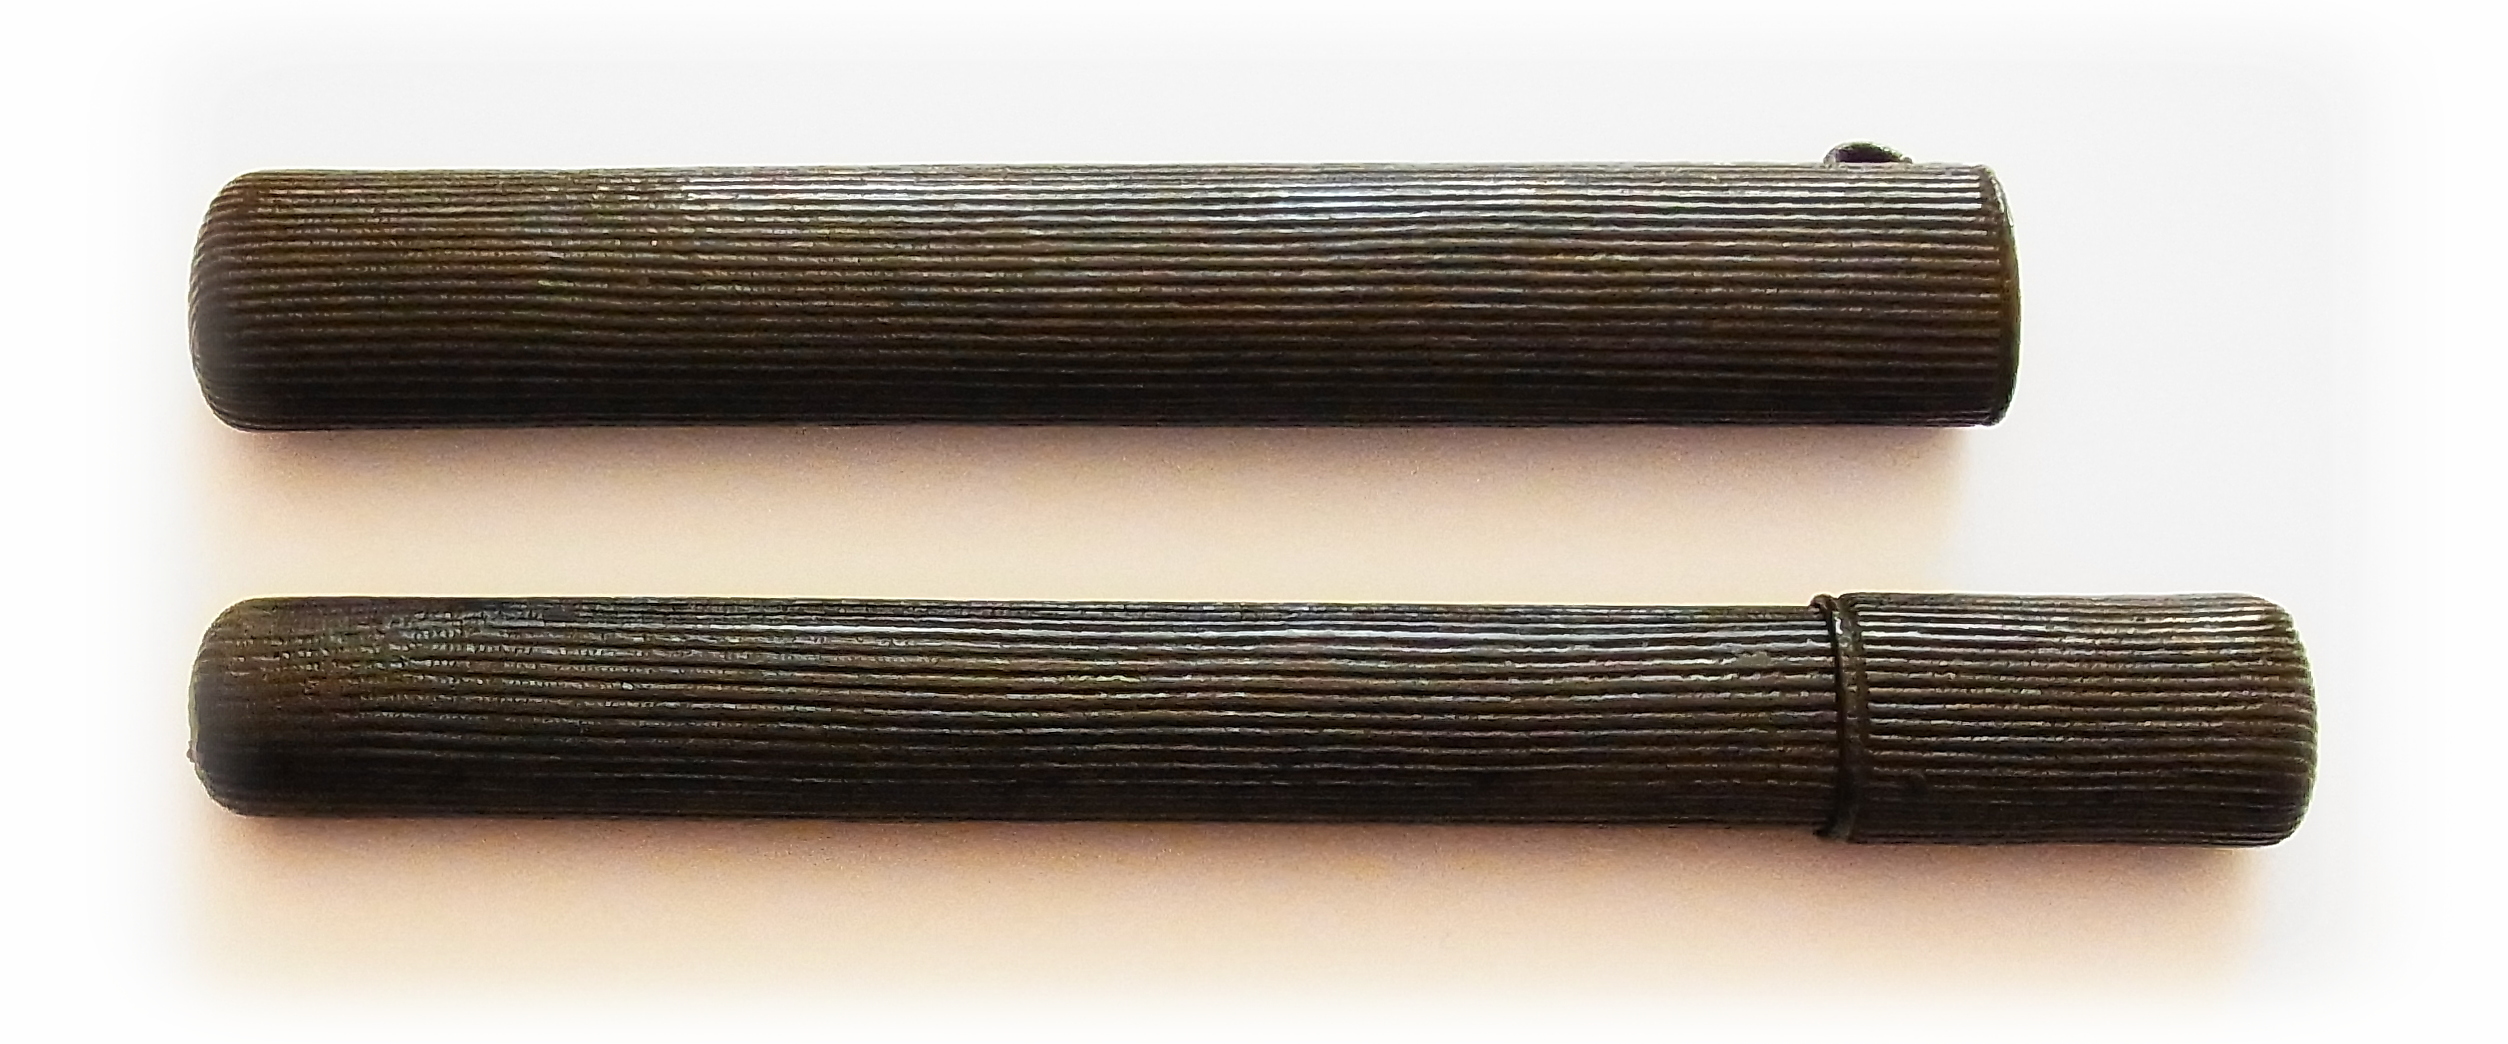 Inside this Kiseru pipe holder, there is another tube of woven Ajiro. 